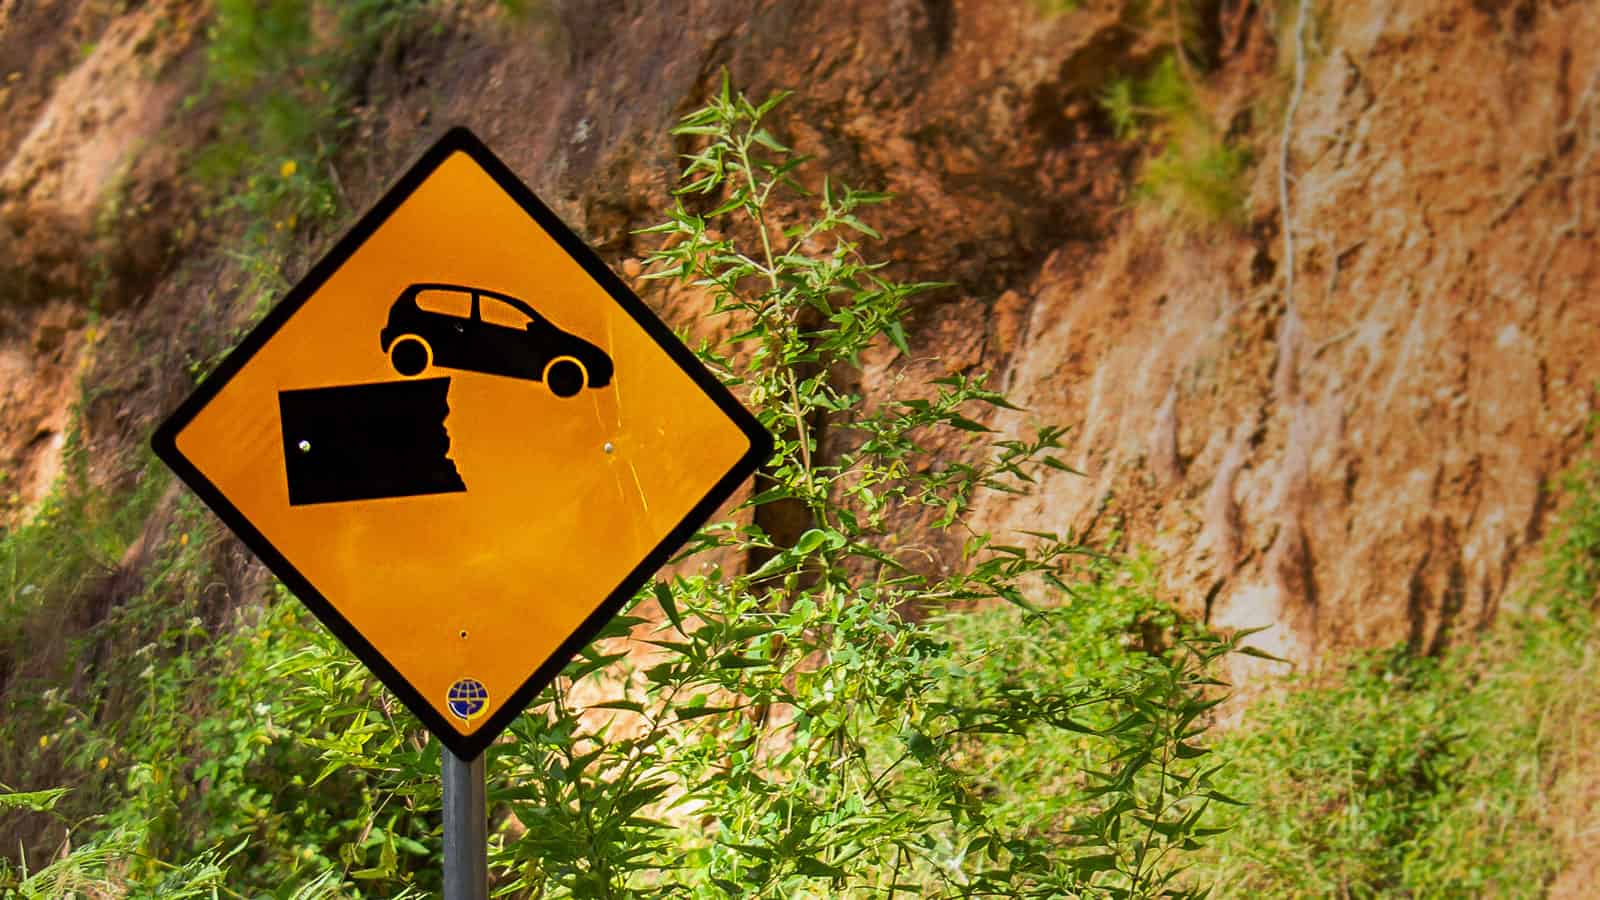 Image of a sign warning that road ends. Shockingly, EVs are not more likely to be a total loss even if you aren't paying attention to signs like this.